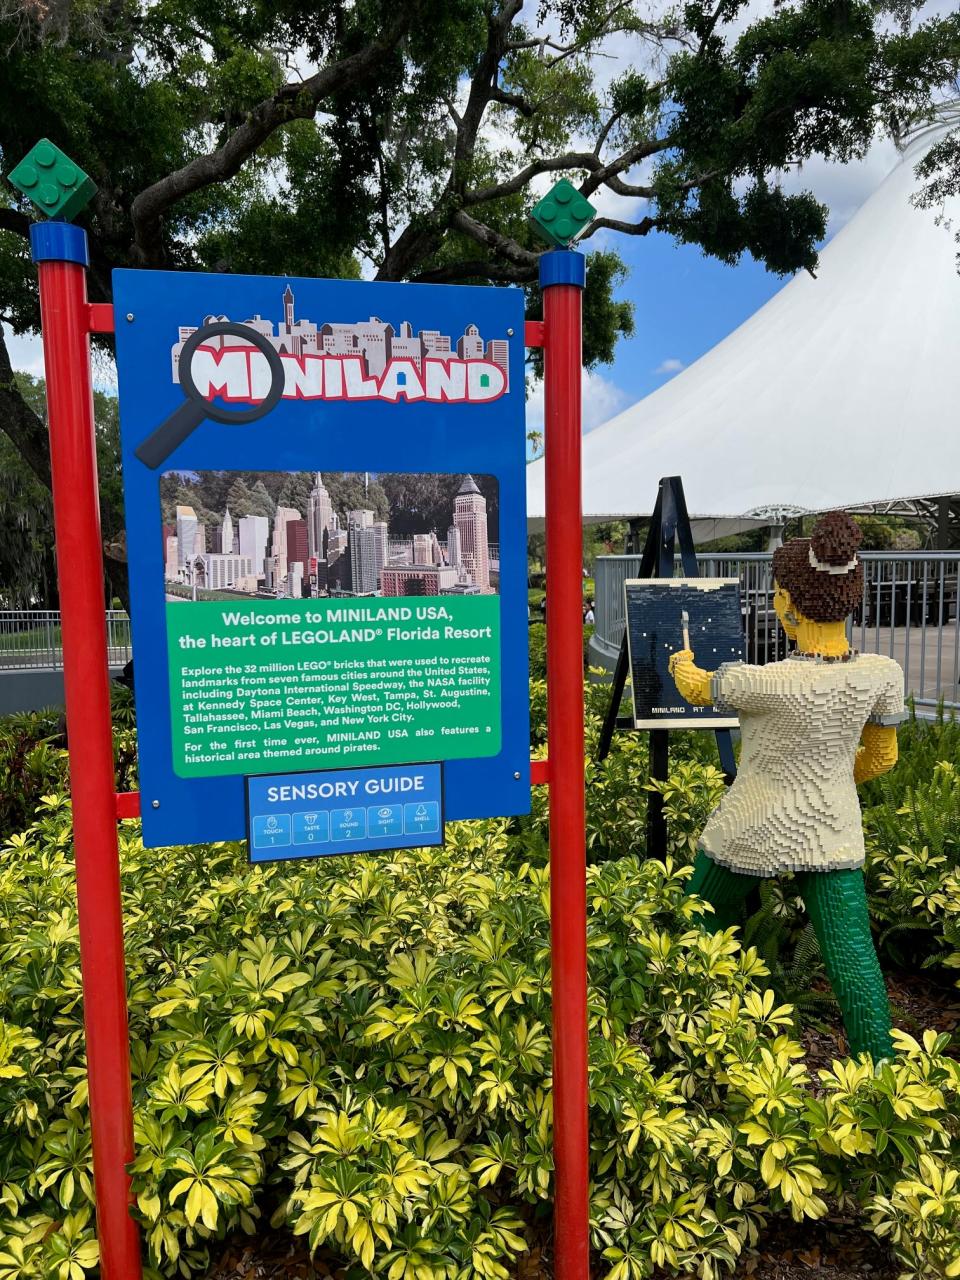 Sensory guides helps guests prepare for various stimuli at LEGOLAND Florida attractions.